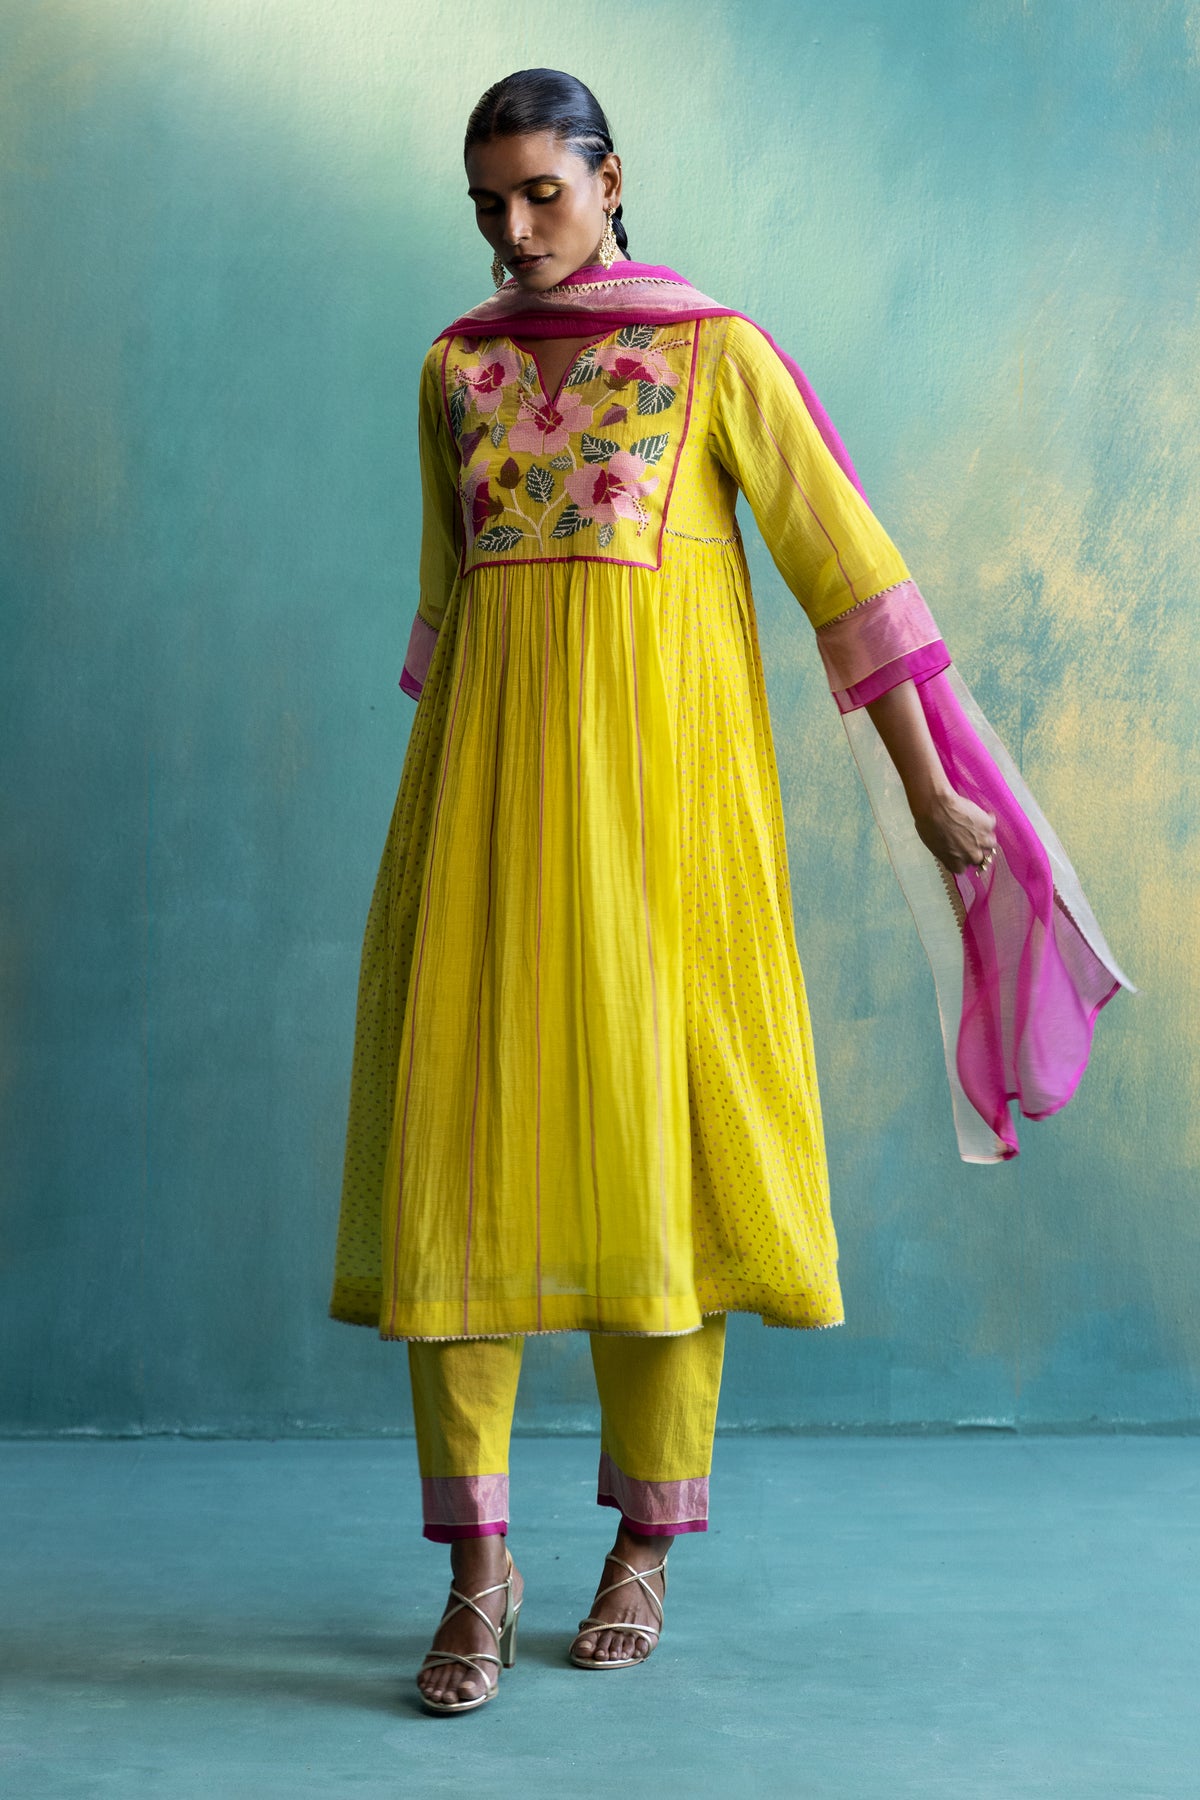 DIL-KASH YELLOW CHANDERI FRONT AND BACK FLORAL EMBROIDERY WITH SIDE PLEATS AND POLKAS CHANDERI KURTA